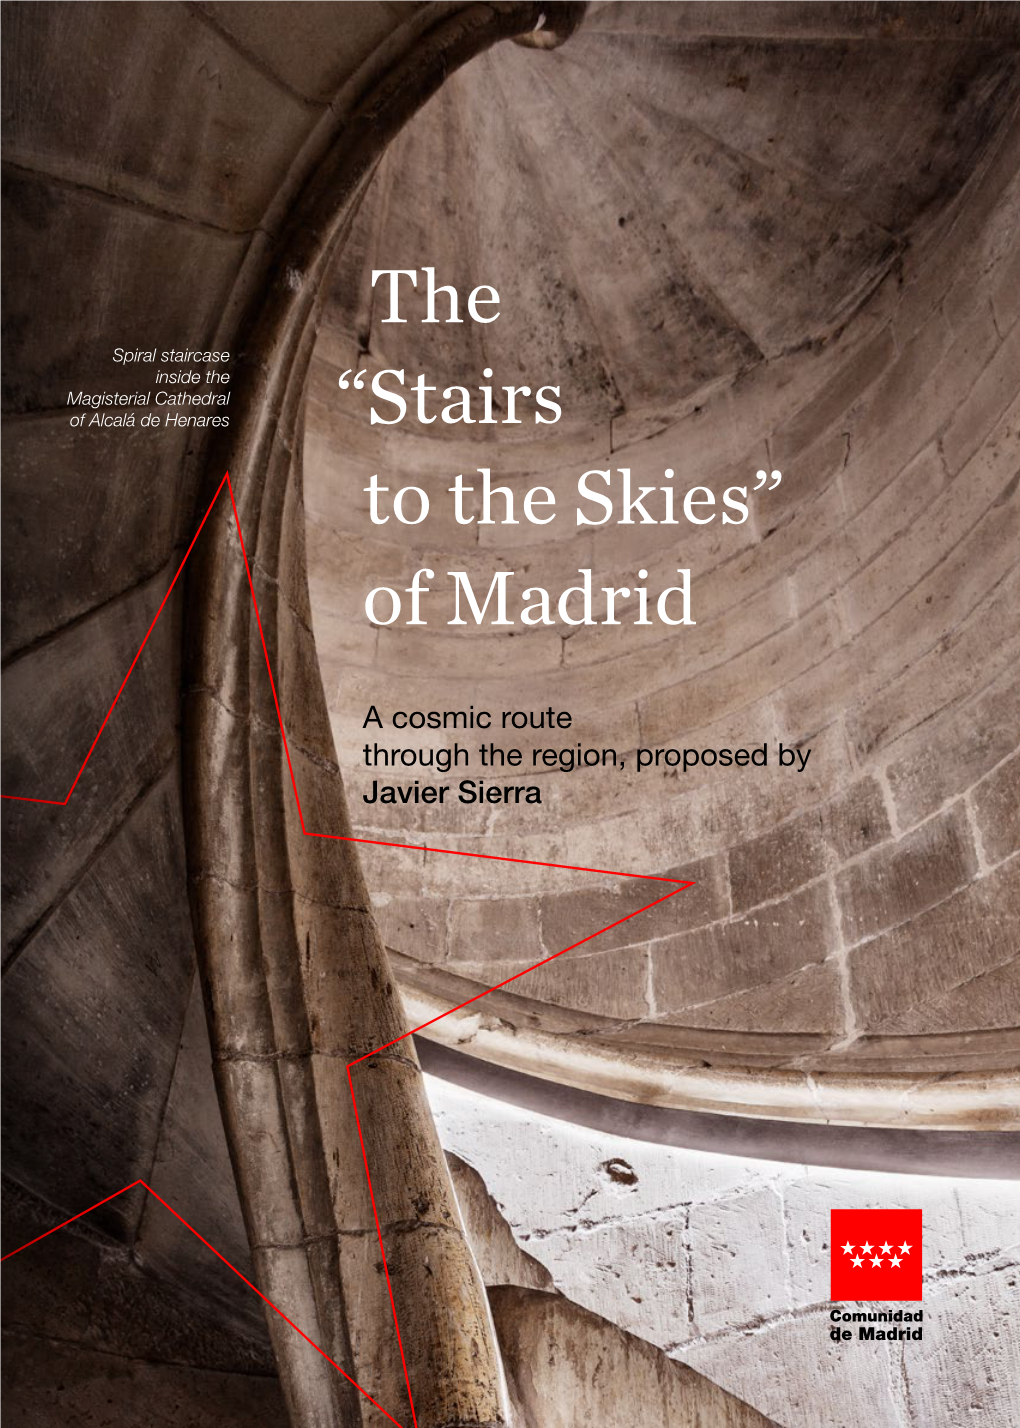 BVCM050286 Guide a Cosmic Route. the "Stairs to the Skies"Of Madrid